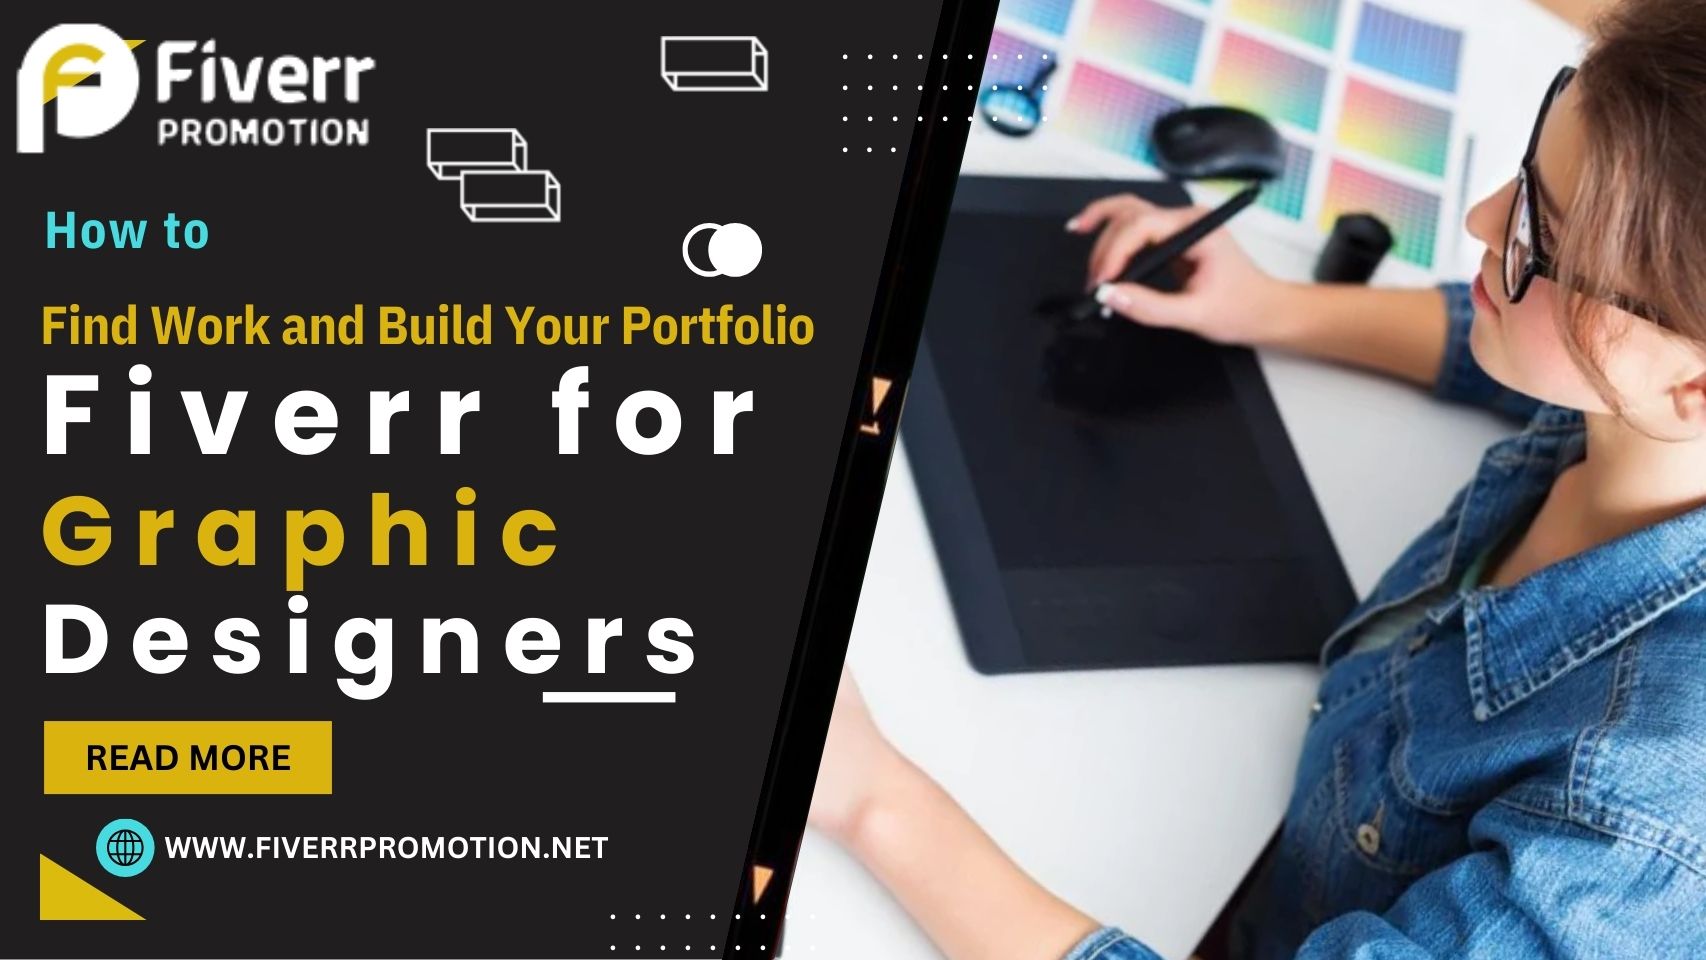 Fiverr for Graphic Designers: How to Find Work and Build Your Portfolio